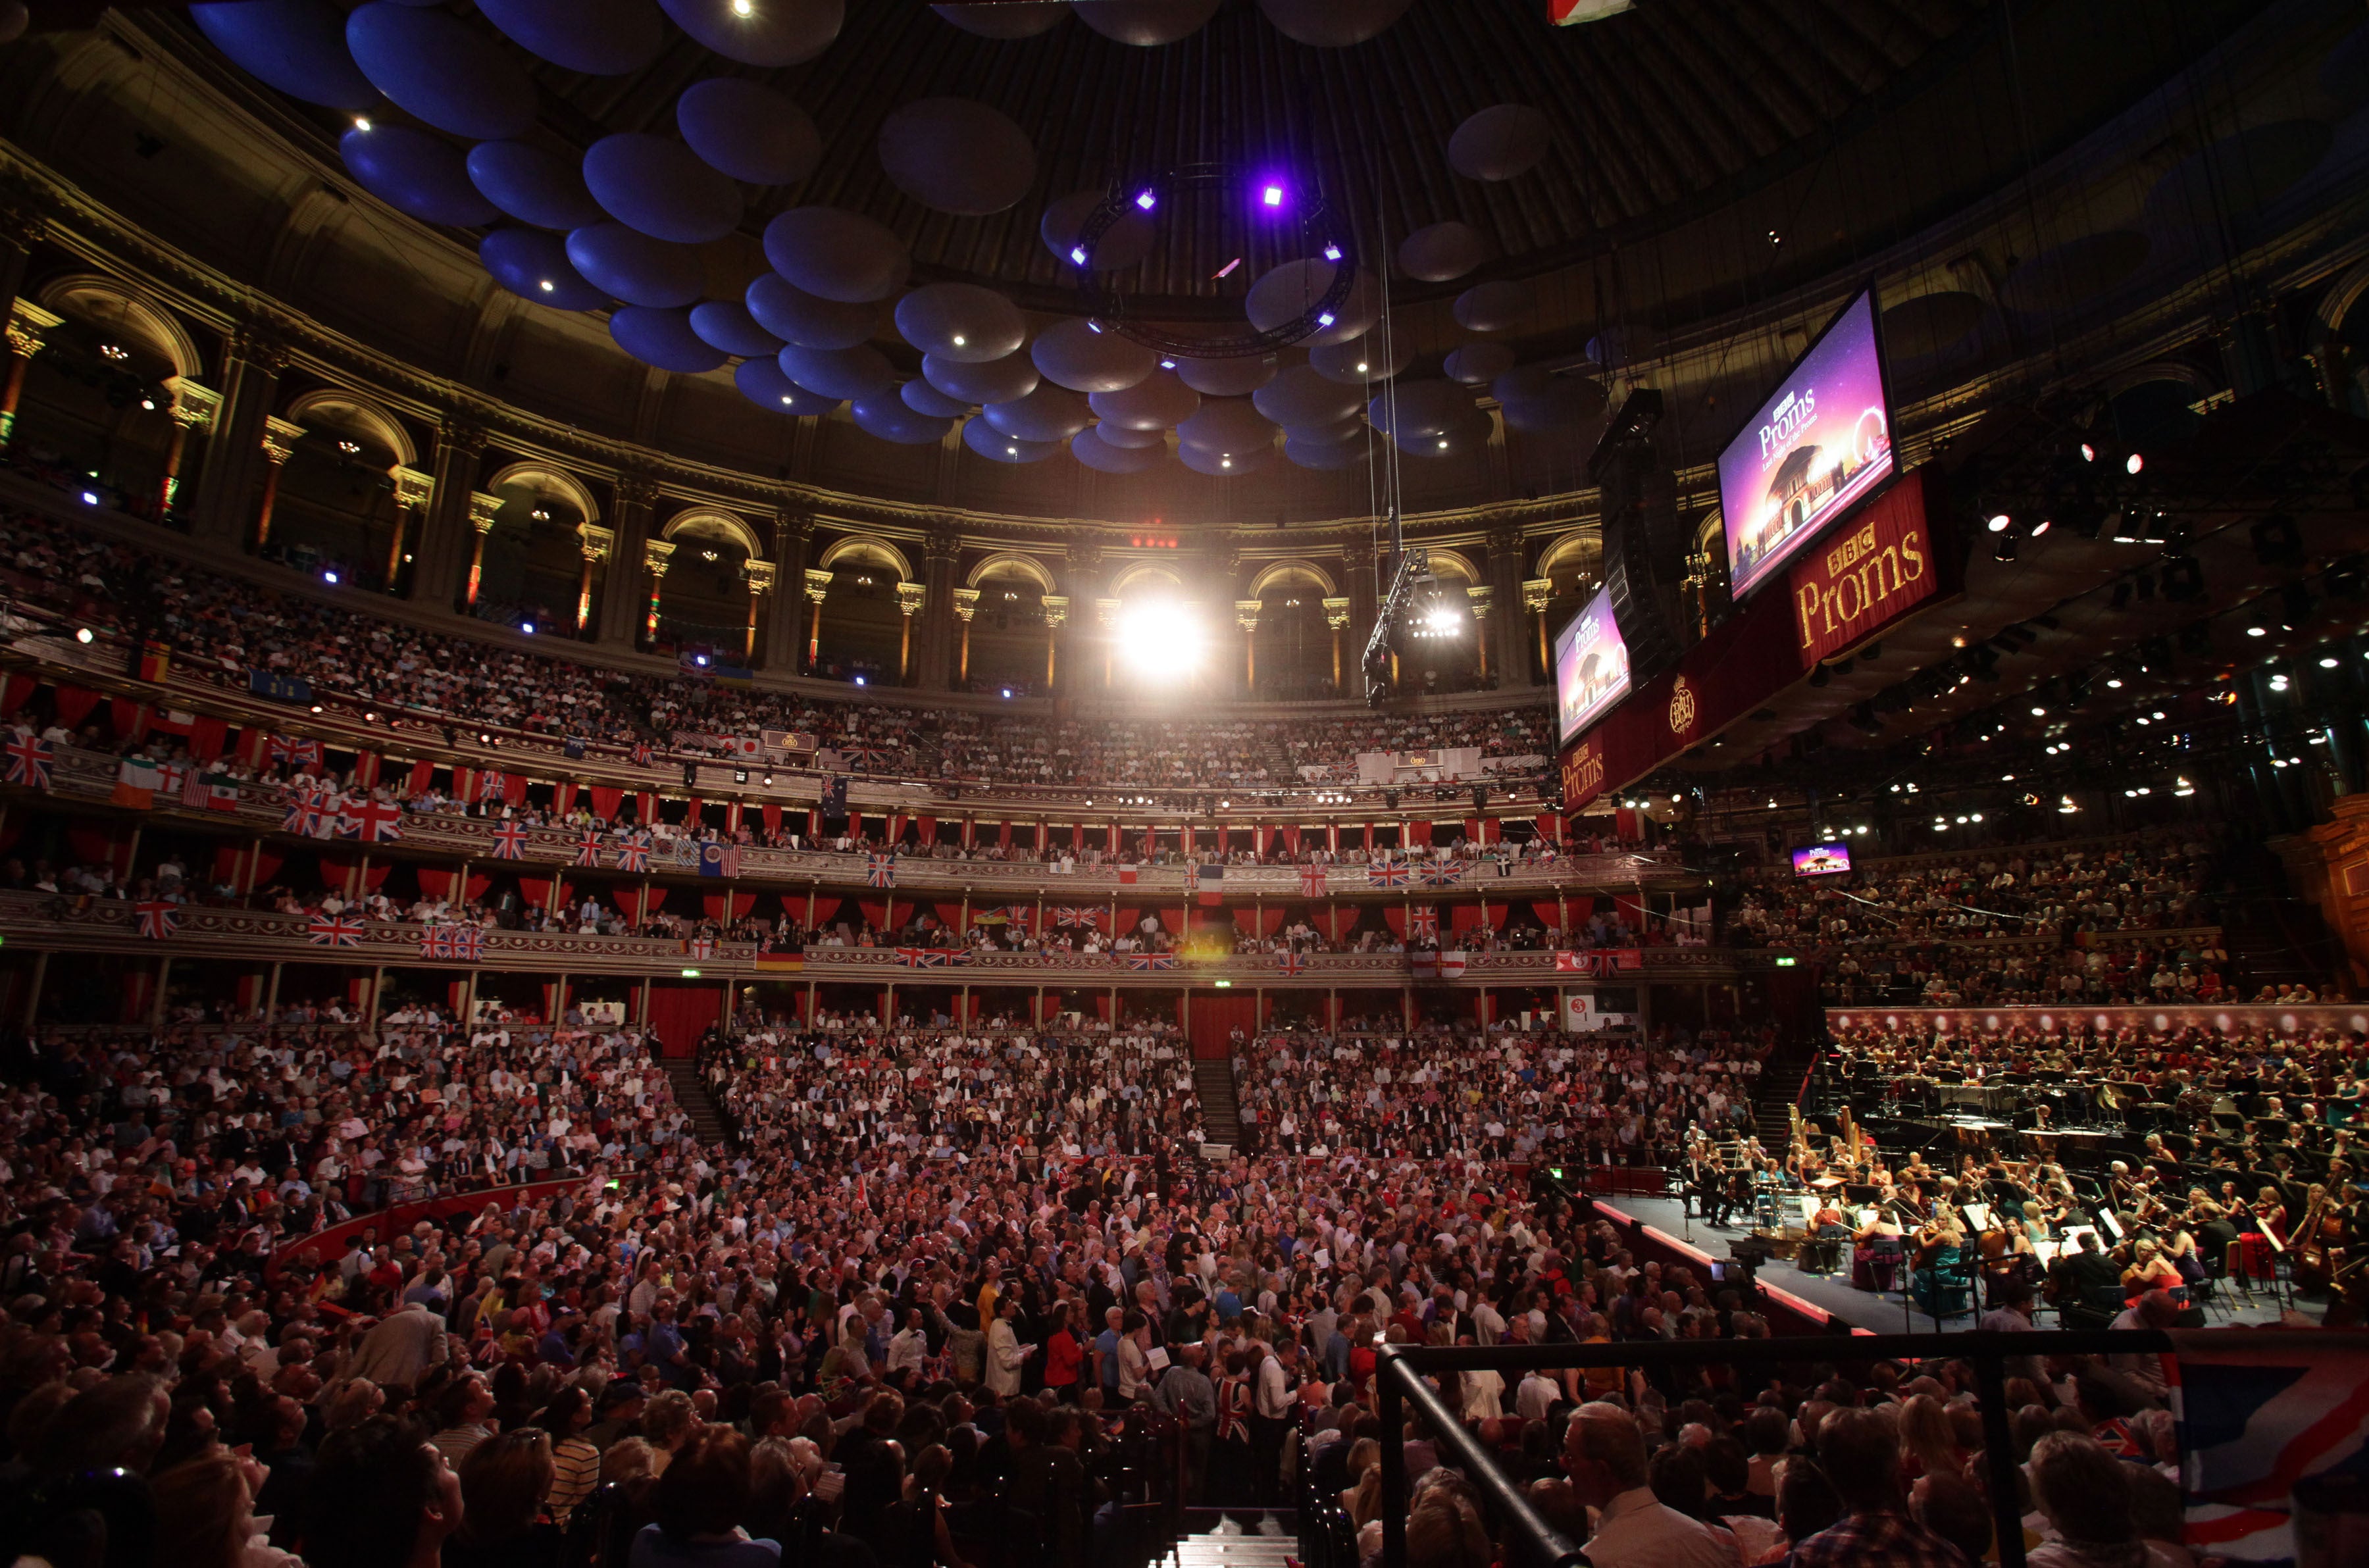 A fight nearly broke out at the Proms over popcorn